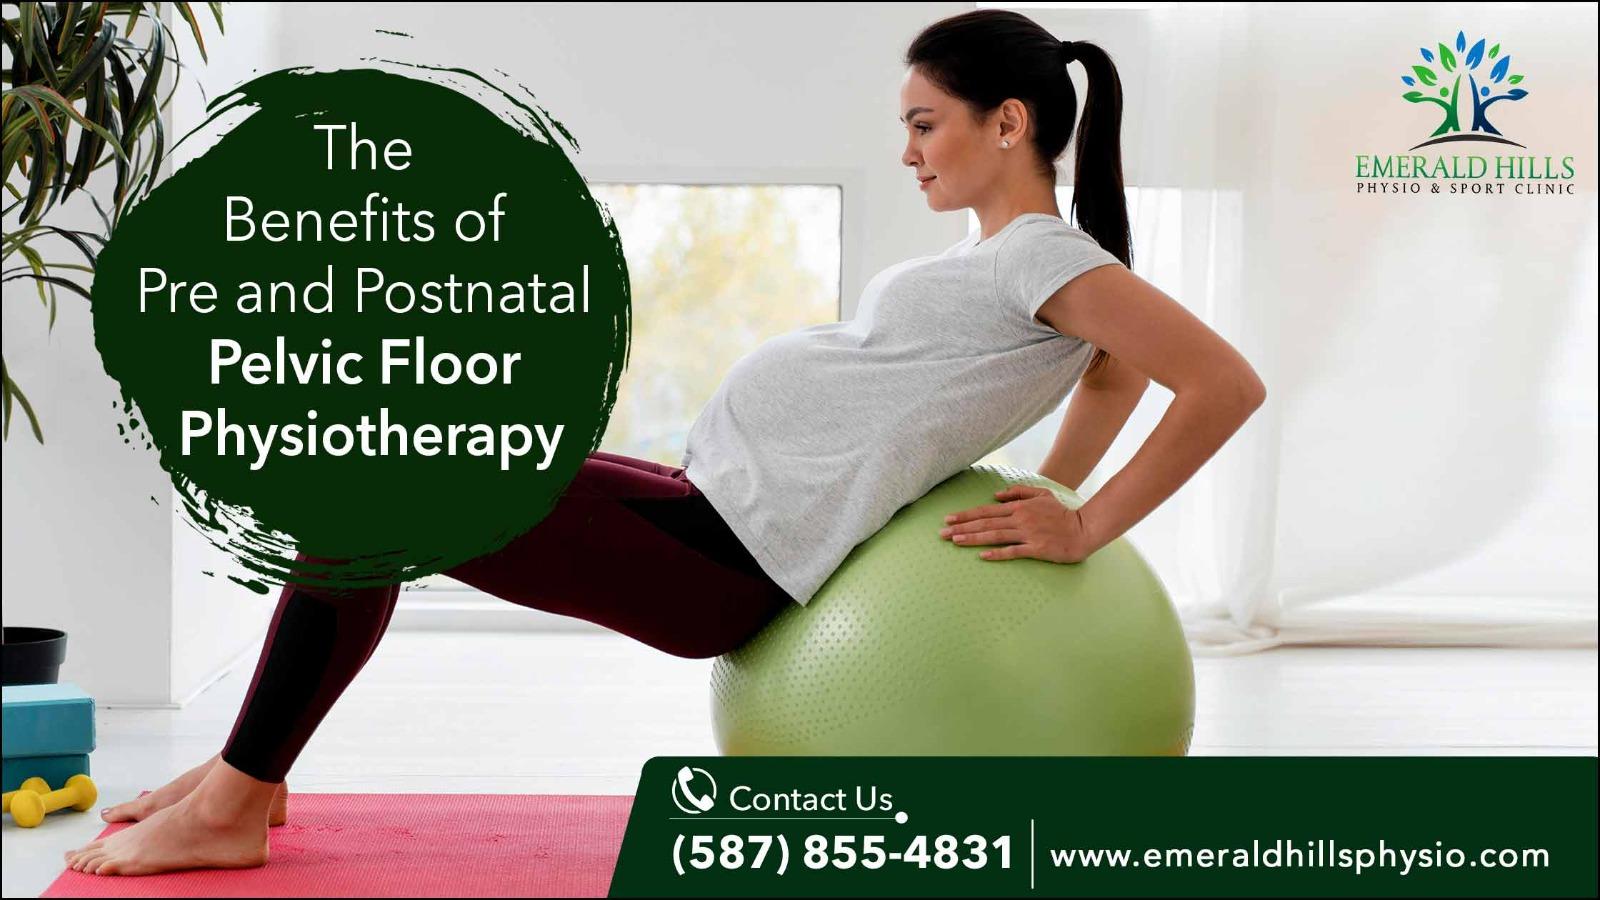 The Benefits of Pre and Postnatal Pelvic Floor Physiotherapy